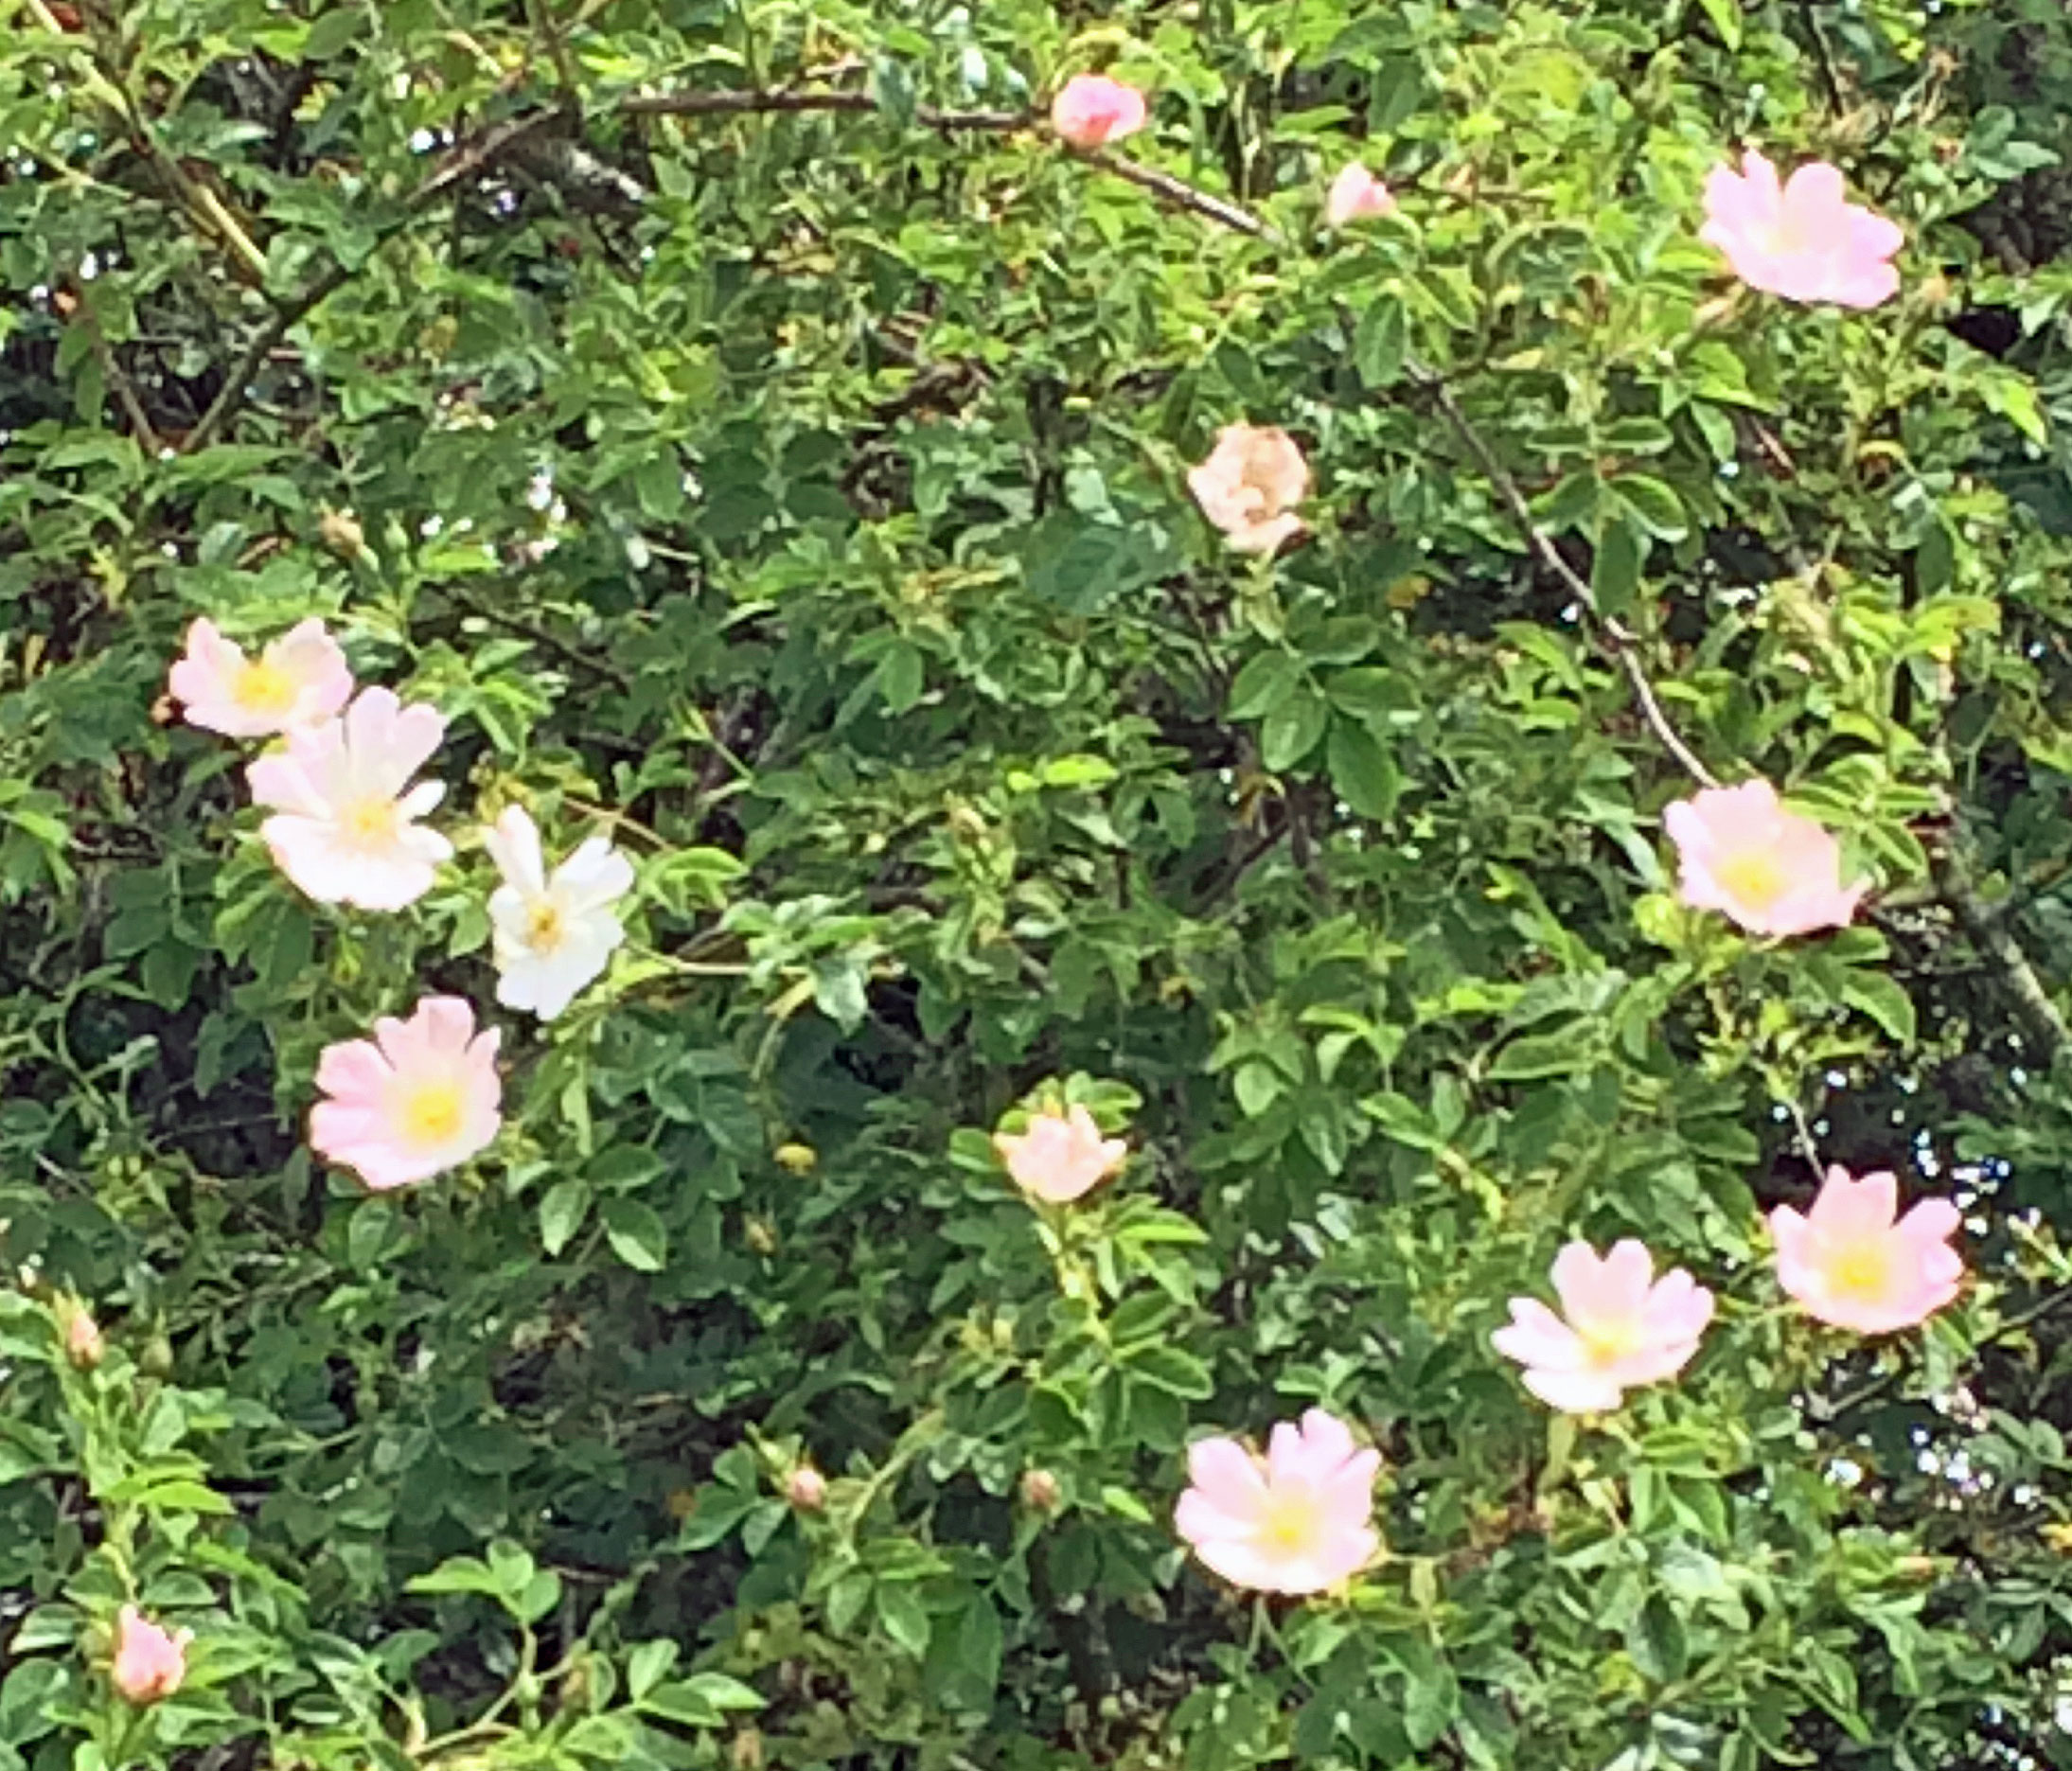 Wild roses in hedgerow